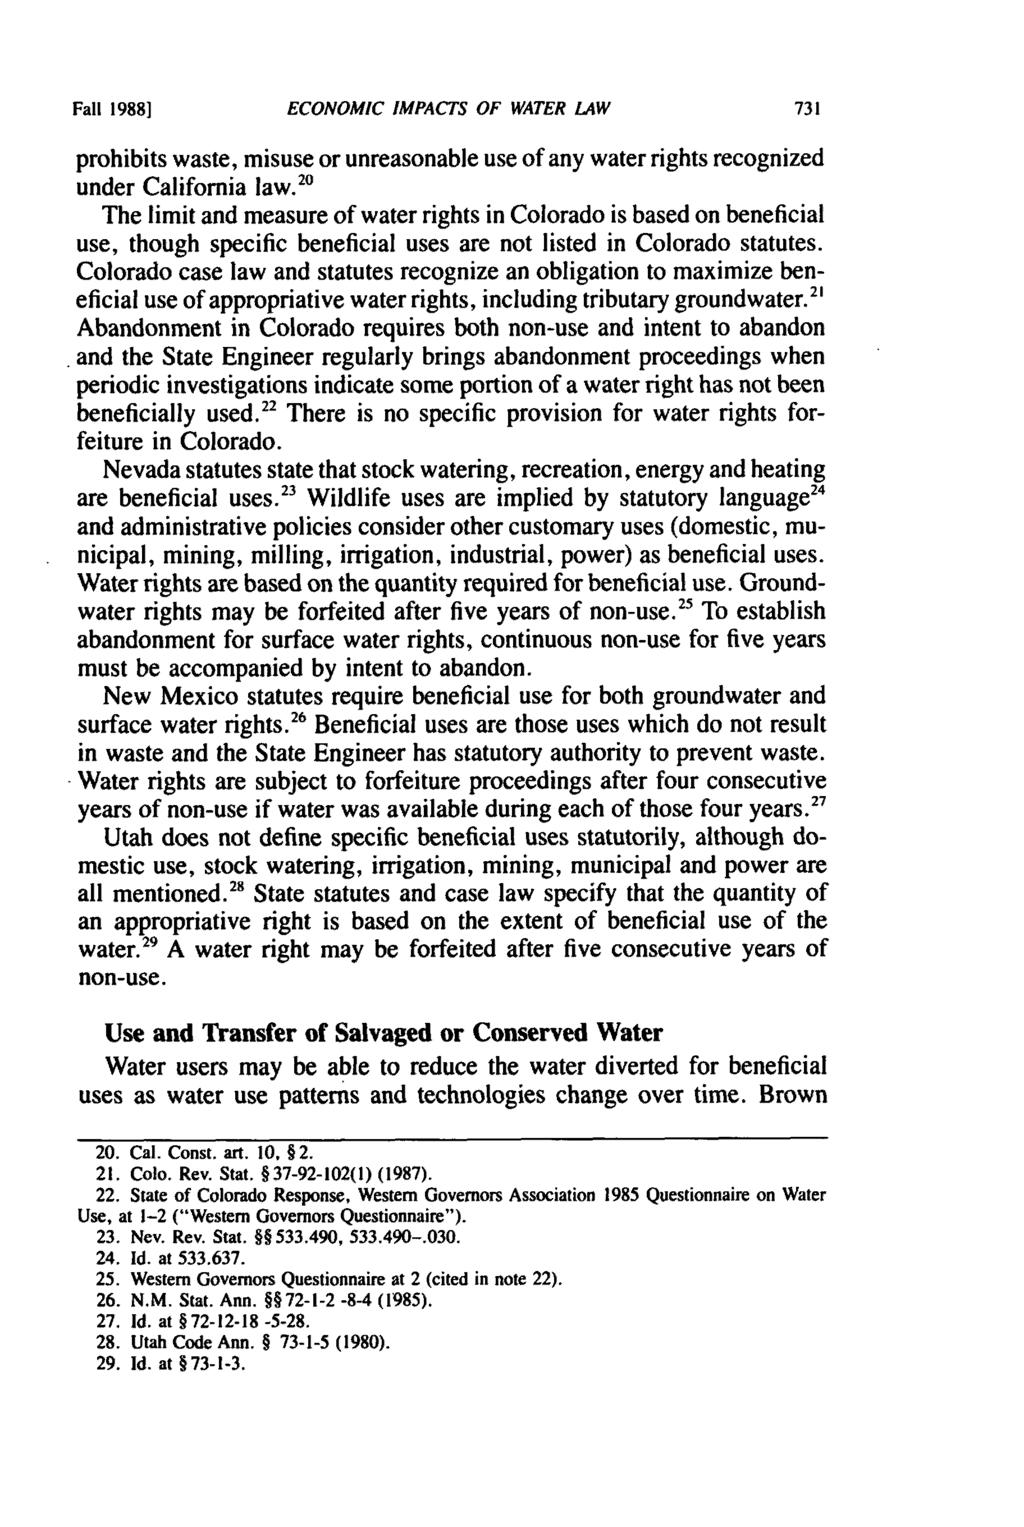 Fall 1988] ECONOMIC IMPACTS OF WATER LAW prohibits waste, misuse or unreasonable use of any water rights recognized under California law.